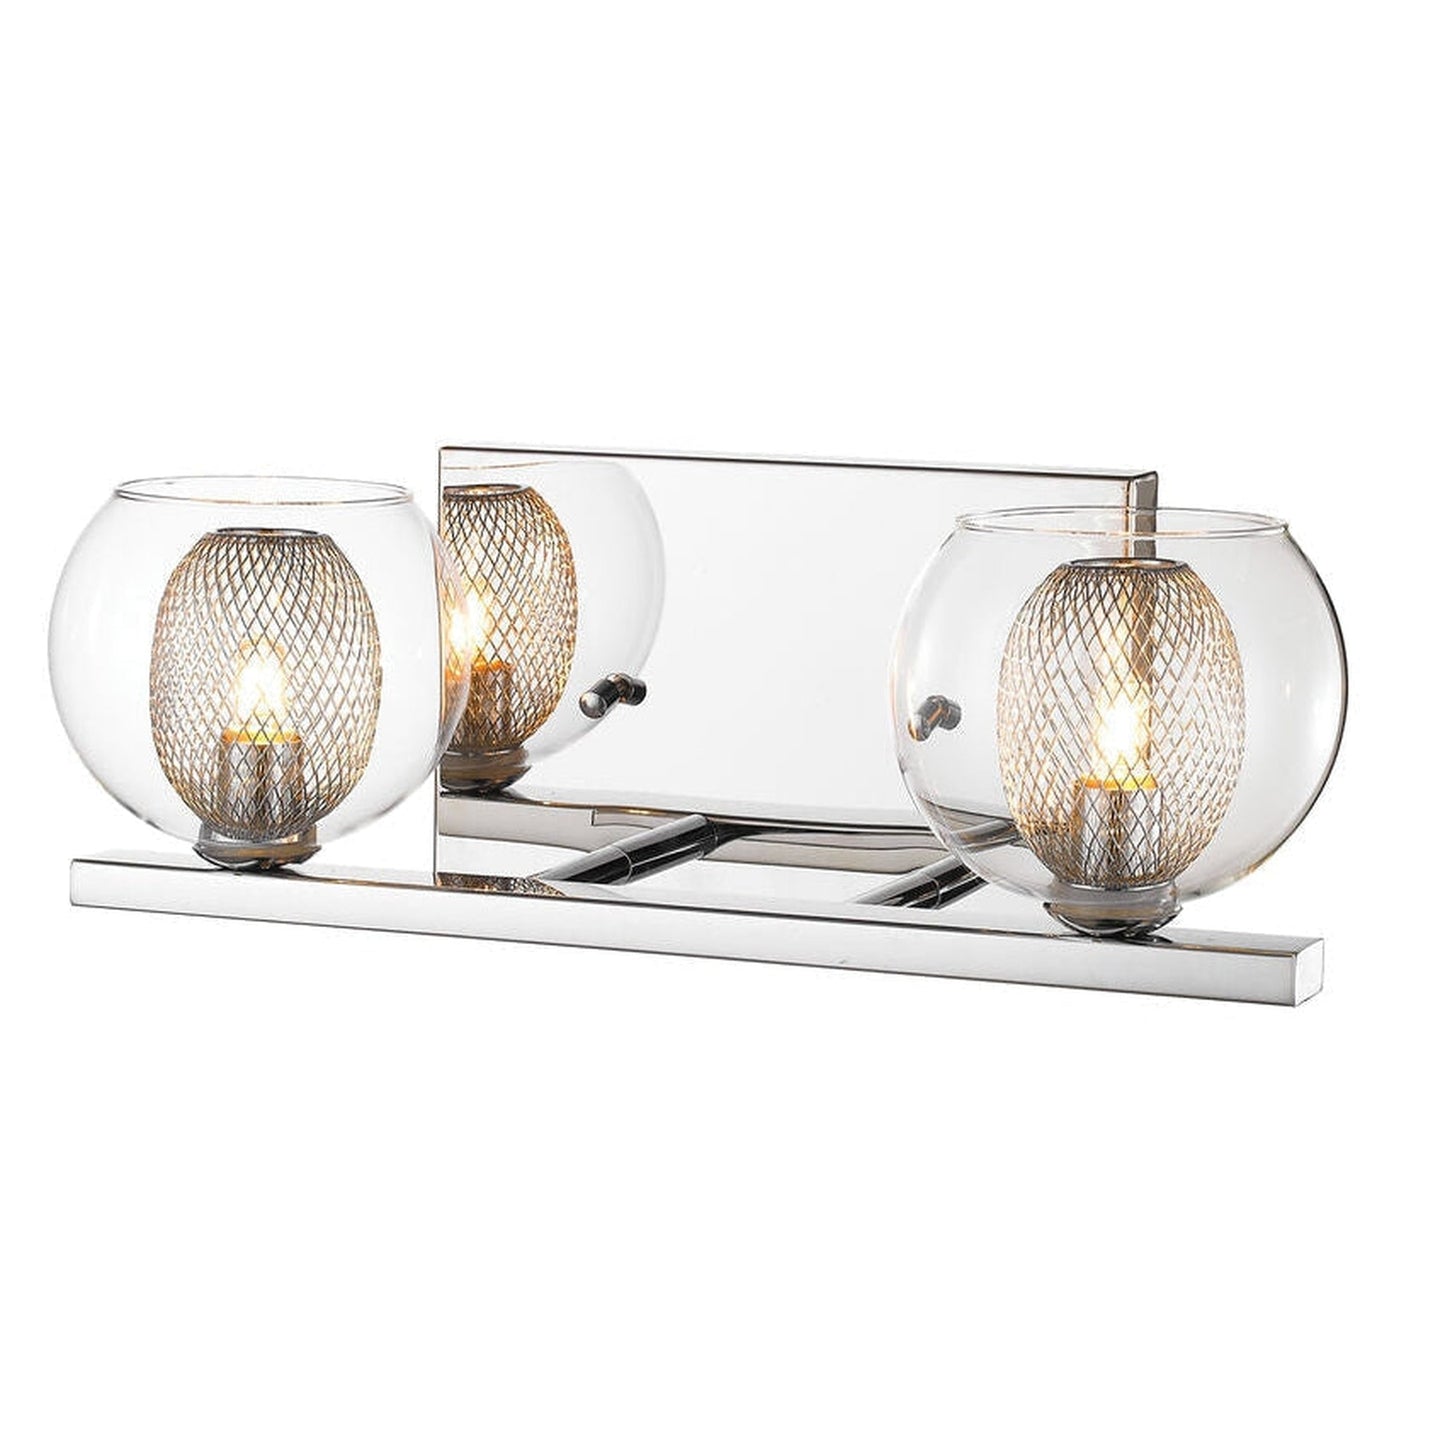 Z-Lite Auge 14" 2-Light Chrome Vanity Light With Clear Glass and Steel Mesh Shade